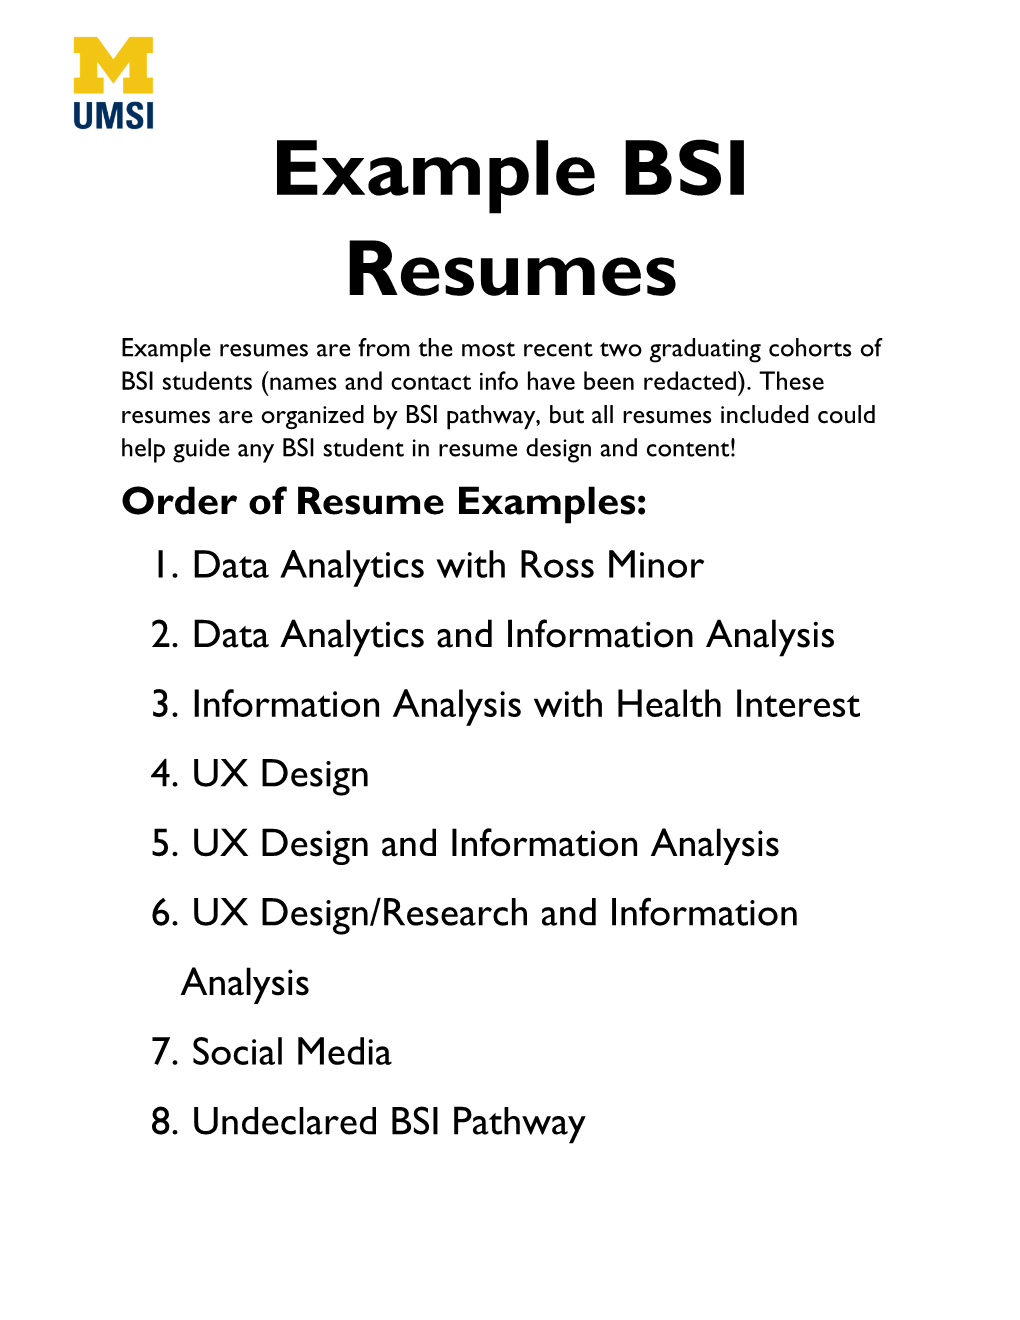 Example BSI Resumes Example Resumes Are from the Most Recent Two Graduating Cohorts of BSI Students (Names and Contact Info Have Been Redacted)